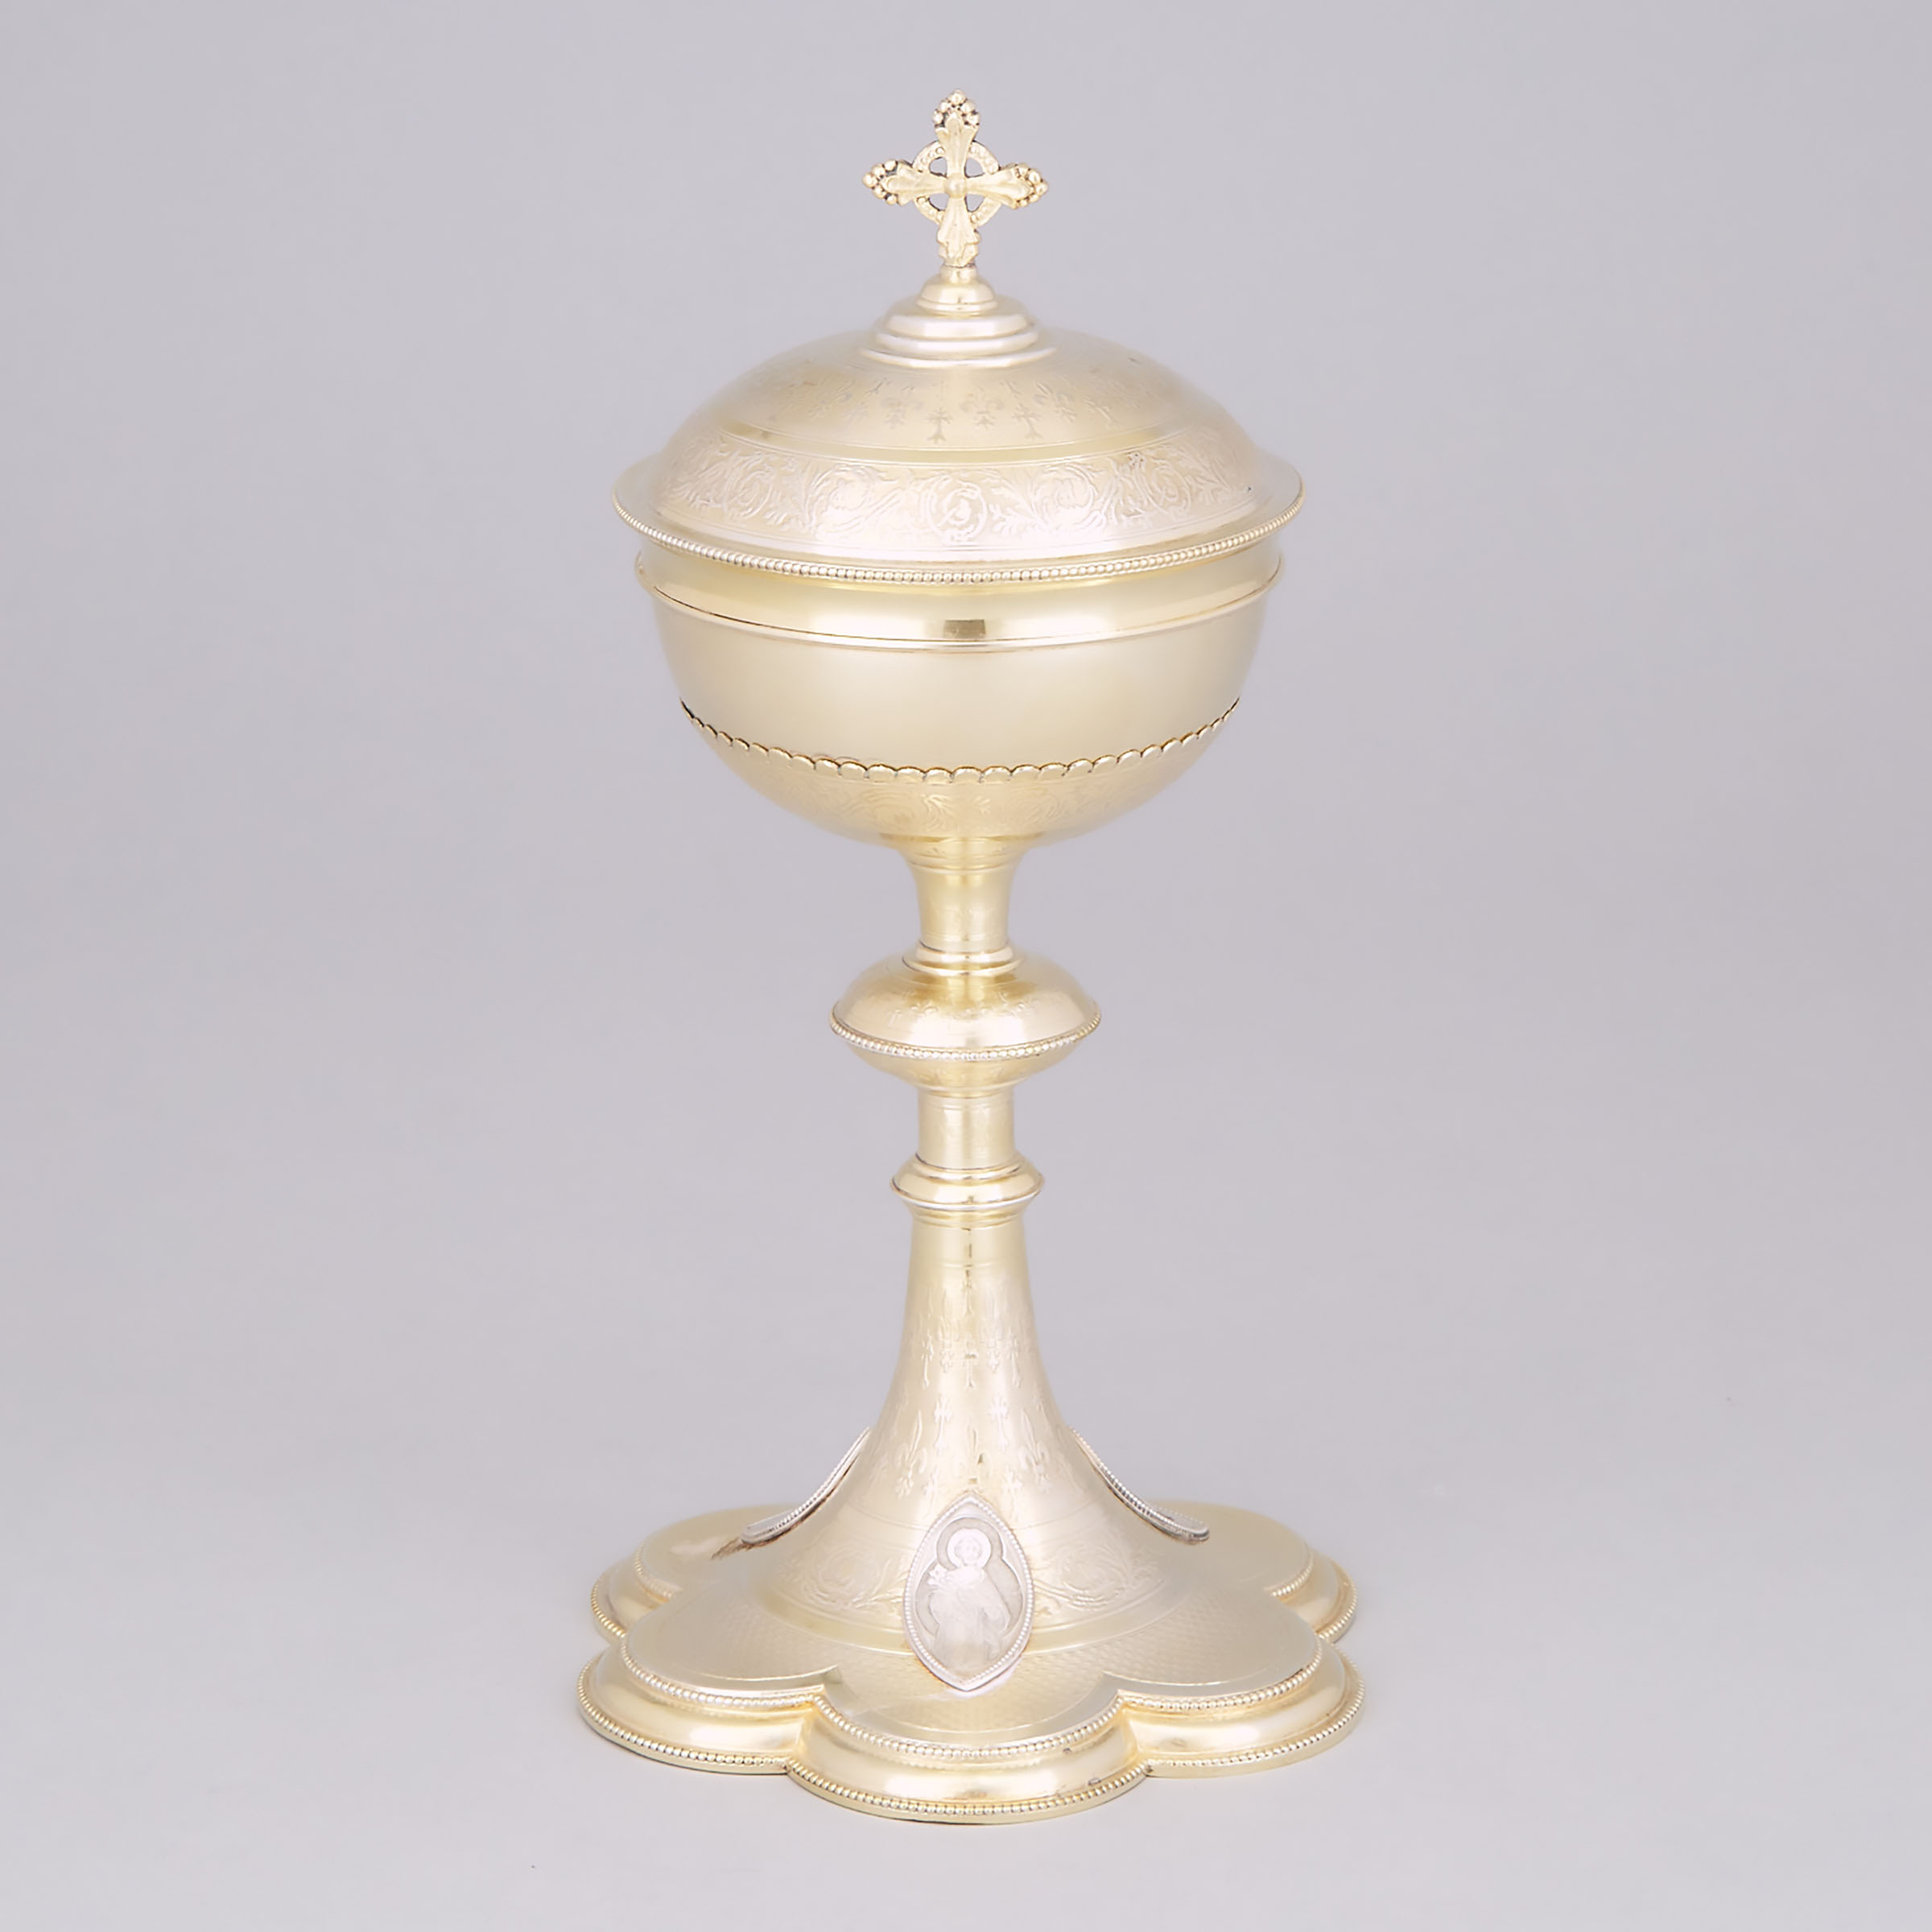 French Silver-Gilt and Plated Ciborium, early 20th century